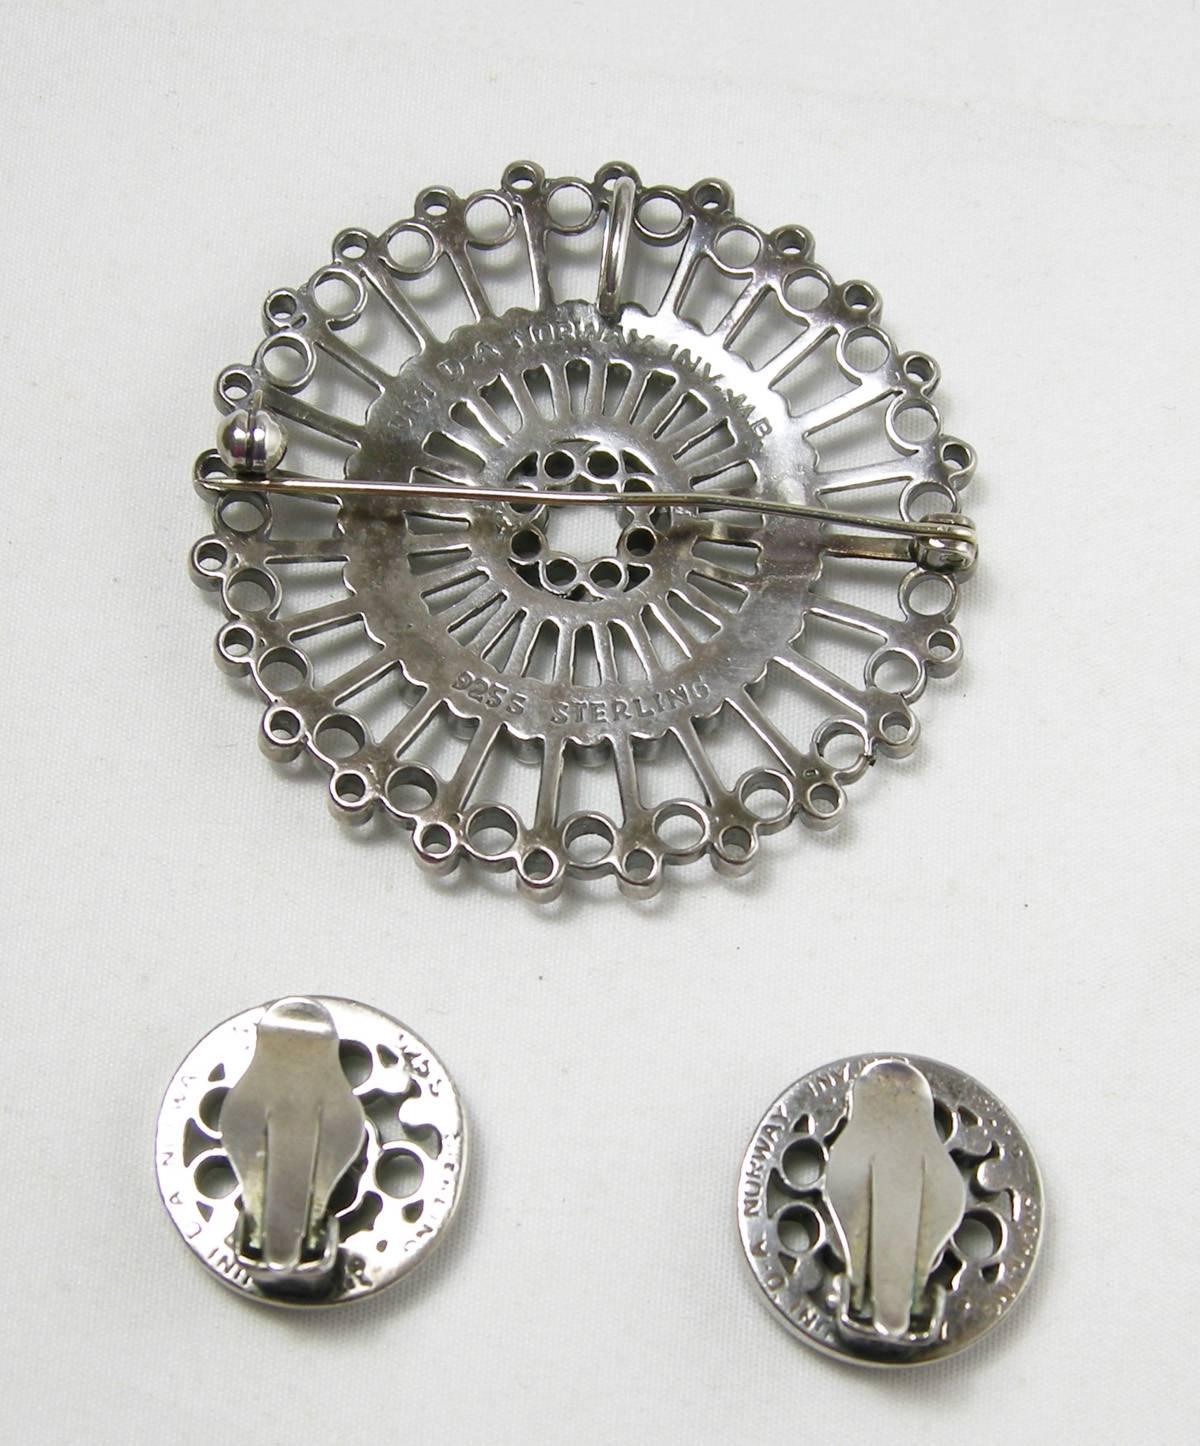 It is very unusual to find a set like this by David Anderson complete.  The pin can also be worn as a pendant.  It has an open work pinwheel design.  It is 2” in diameter.  The matching clip earrings are 1/2